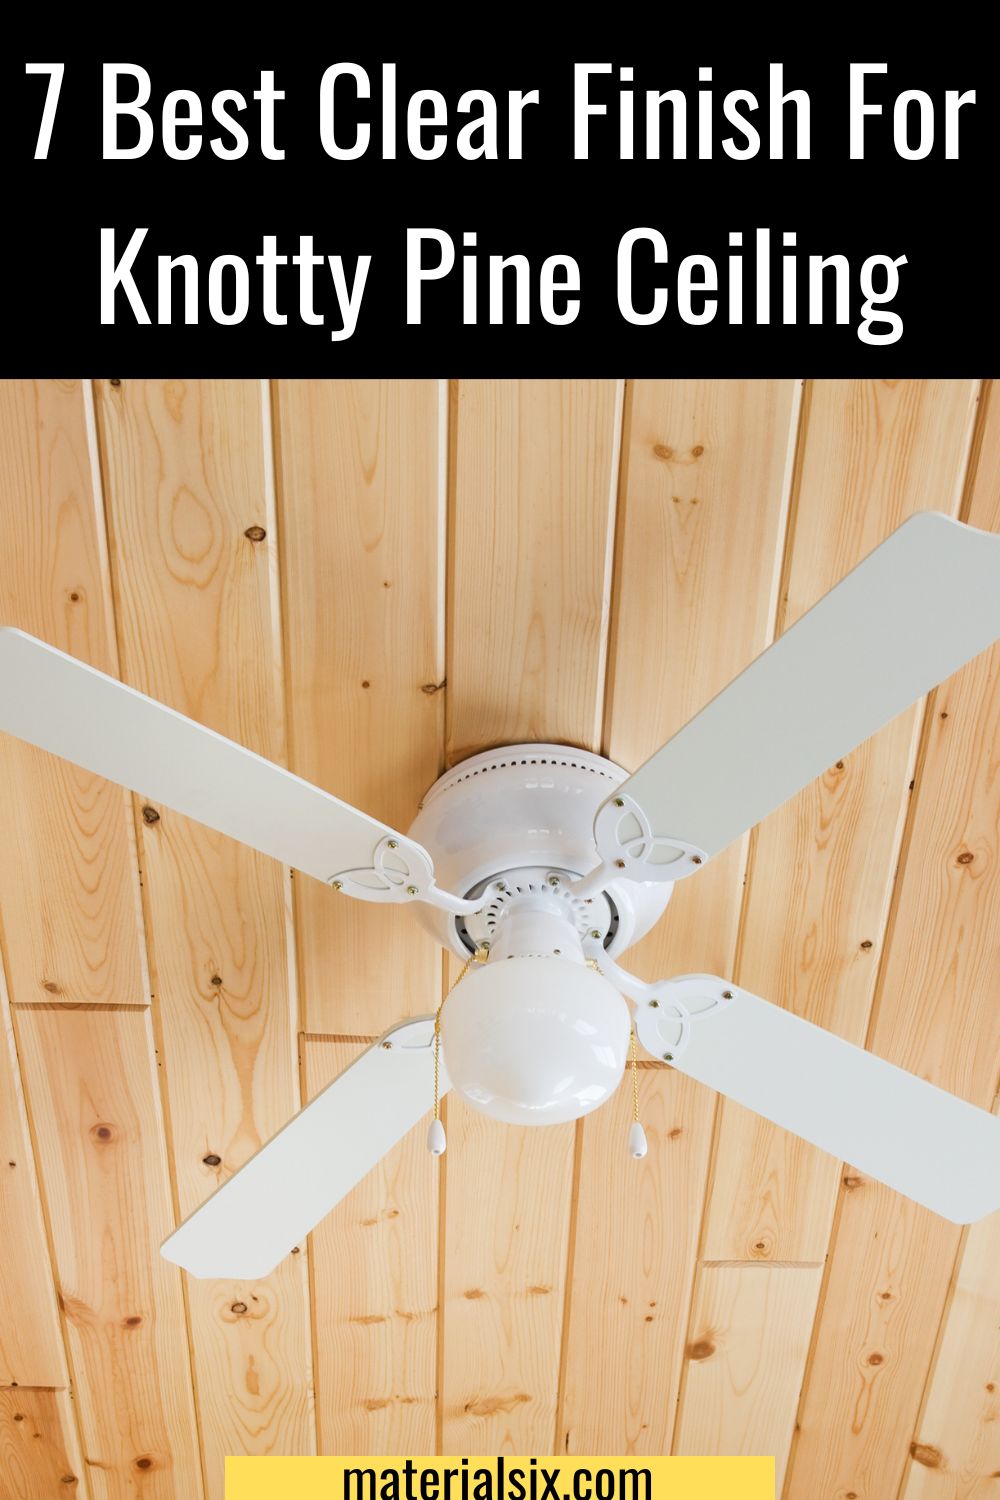 Best clear finish for knotty pine ceiling